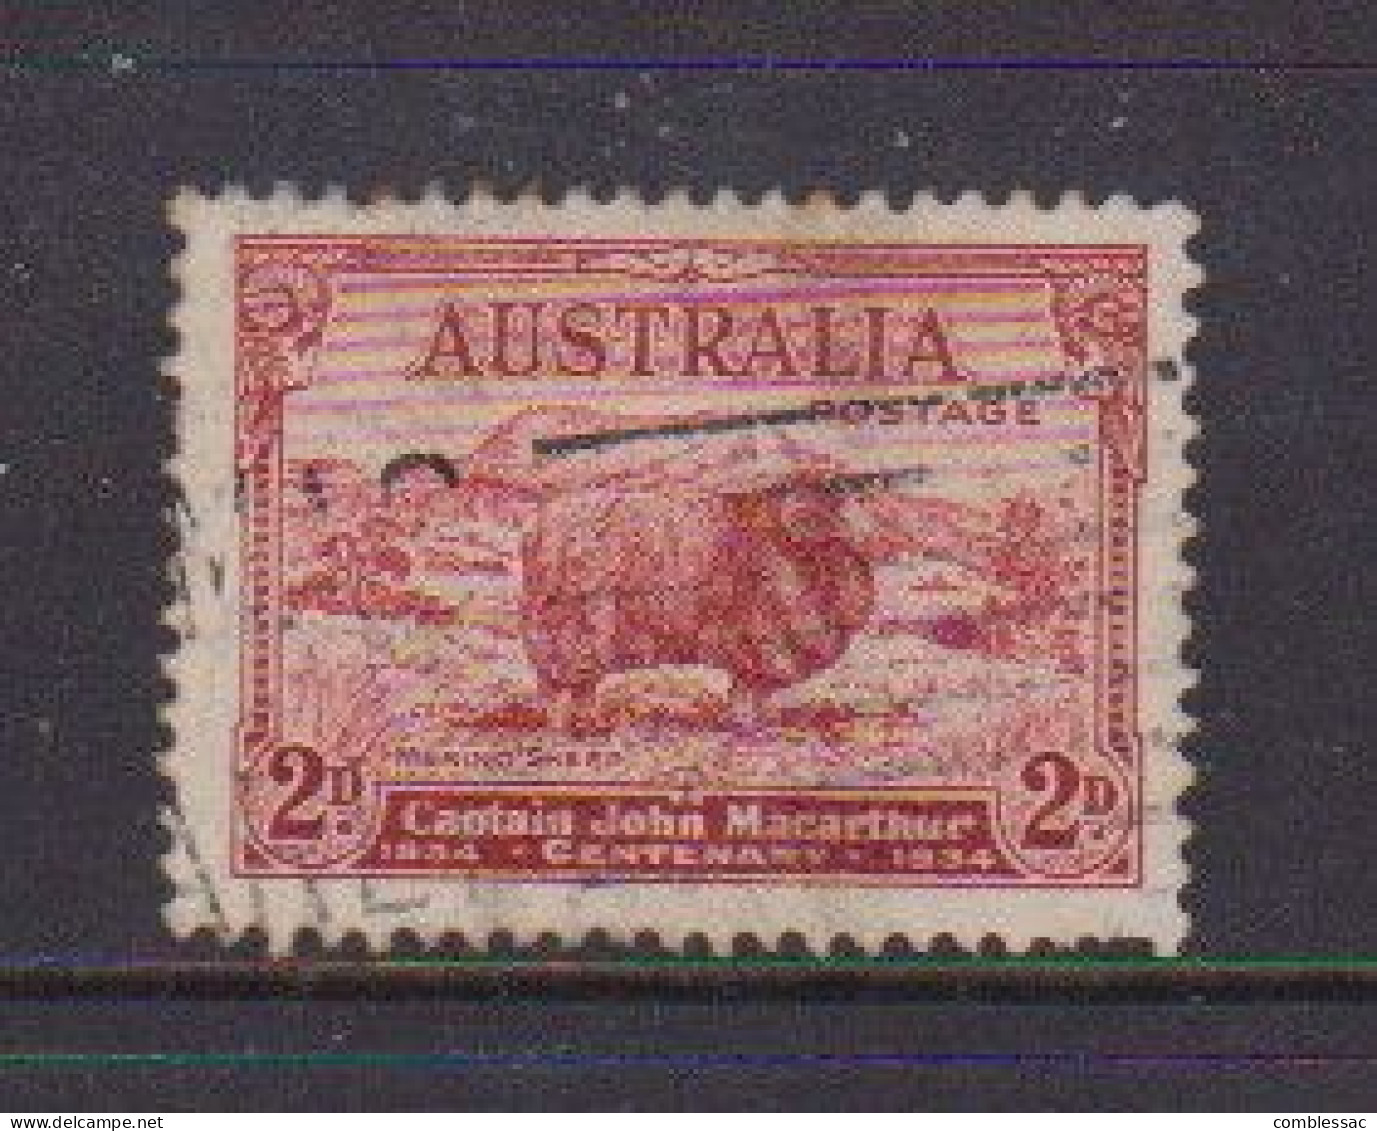 AUSTRALIA    1934    Dwath  Centenary  Of  Macarthur   2d  Red        USED - Used Stamps